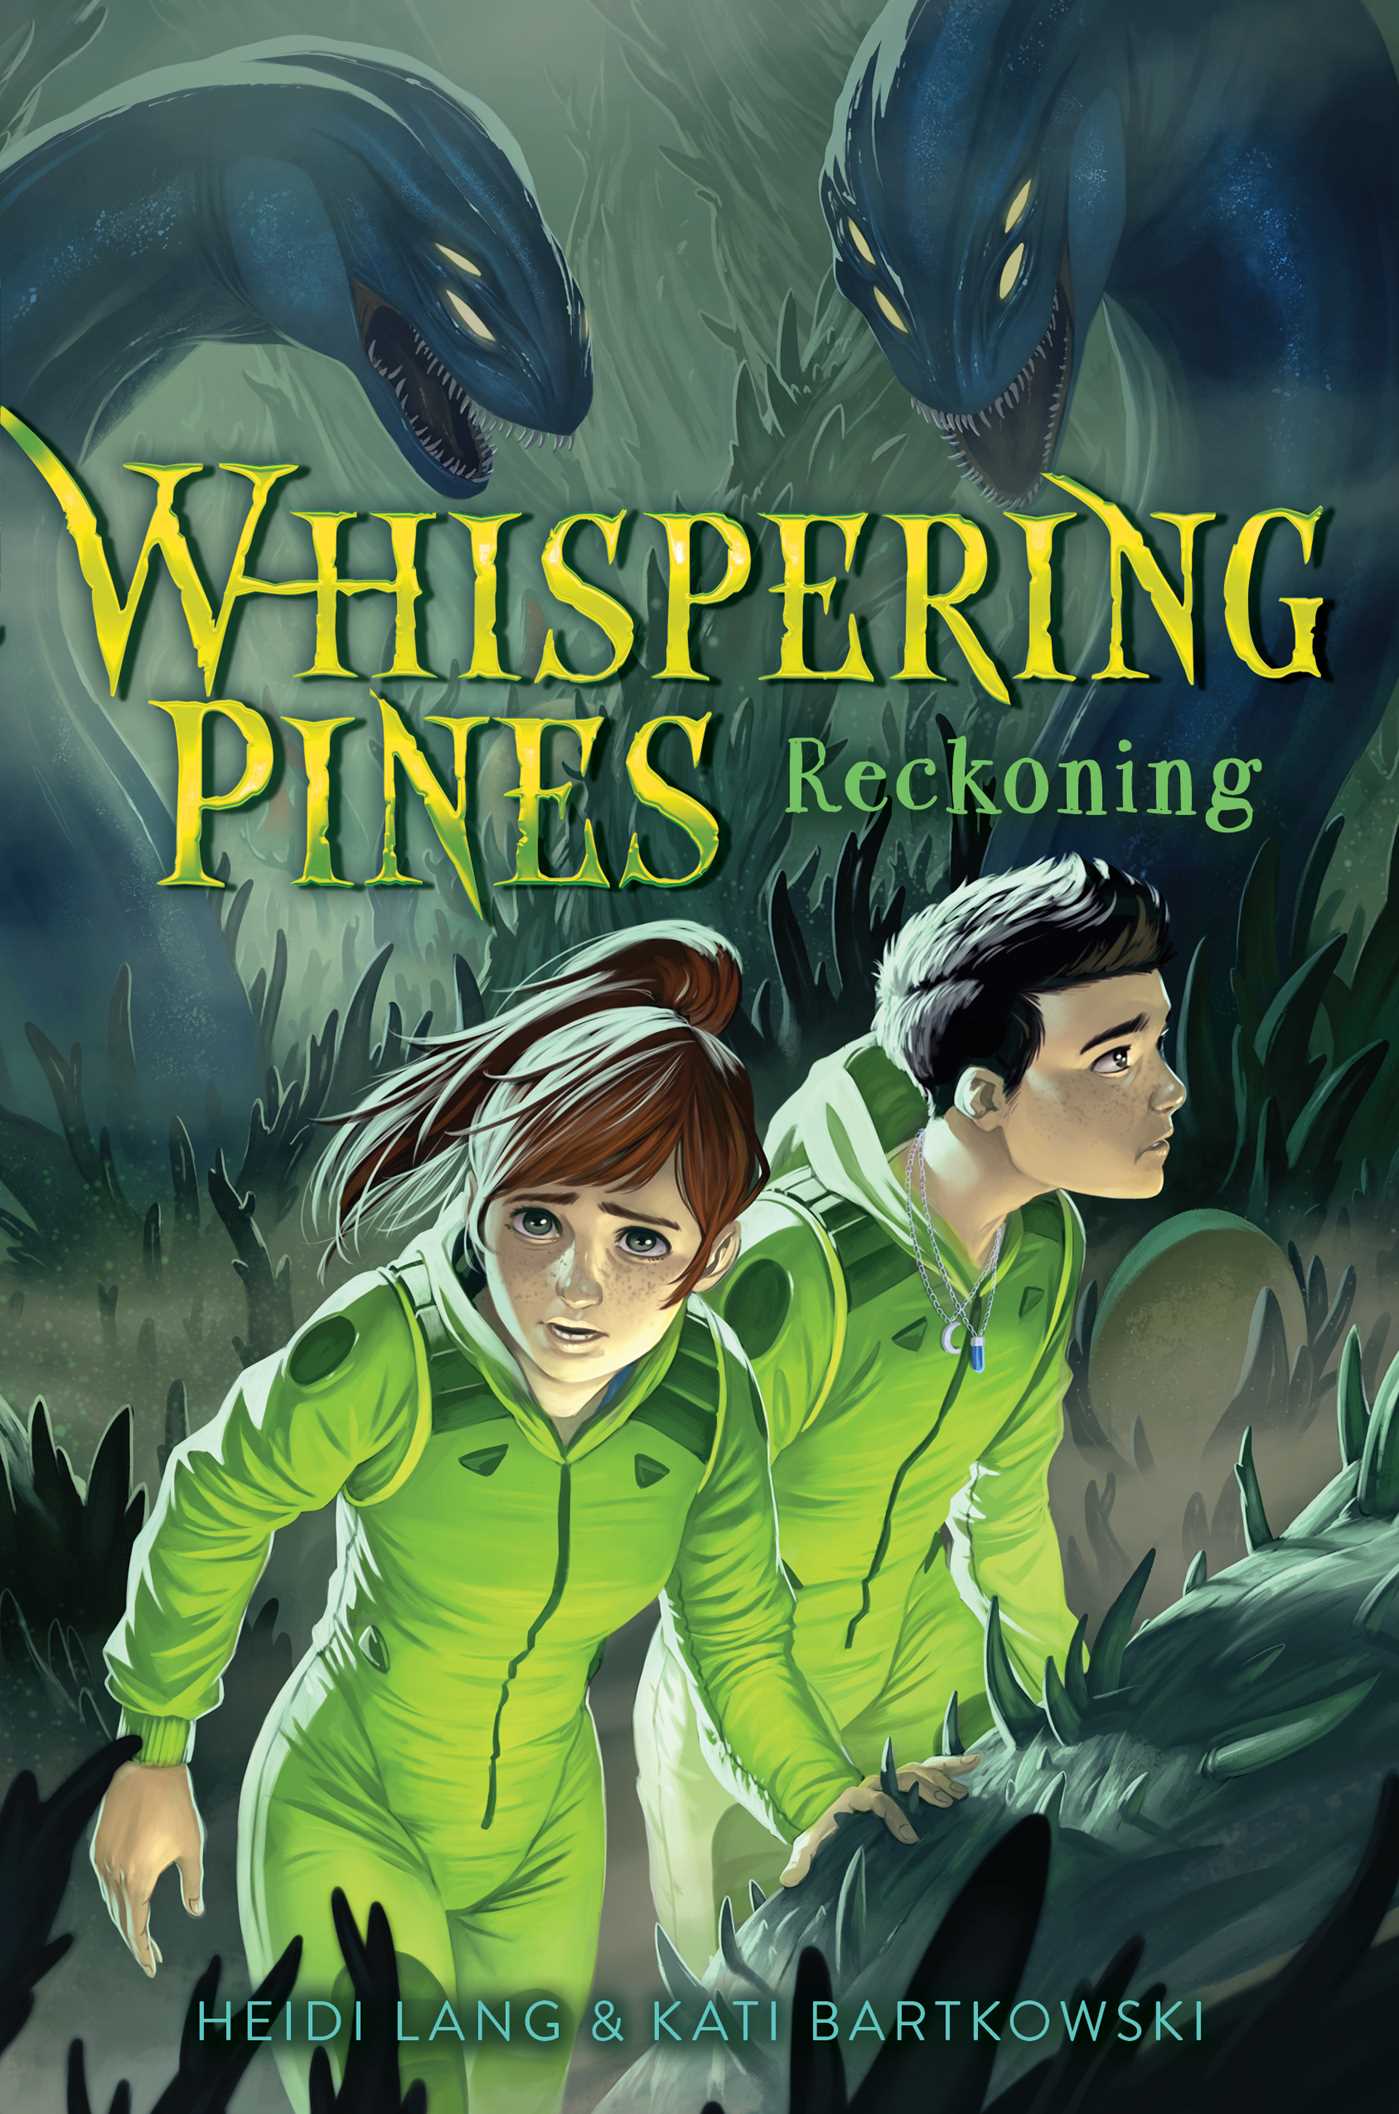 Image for "Whispering Pines: Reckoning"